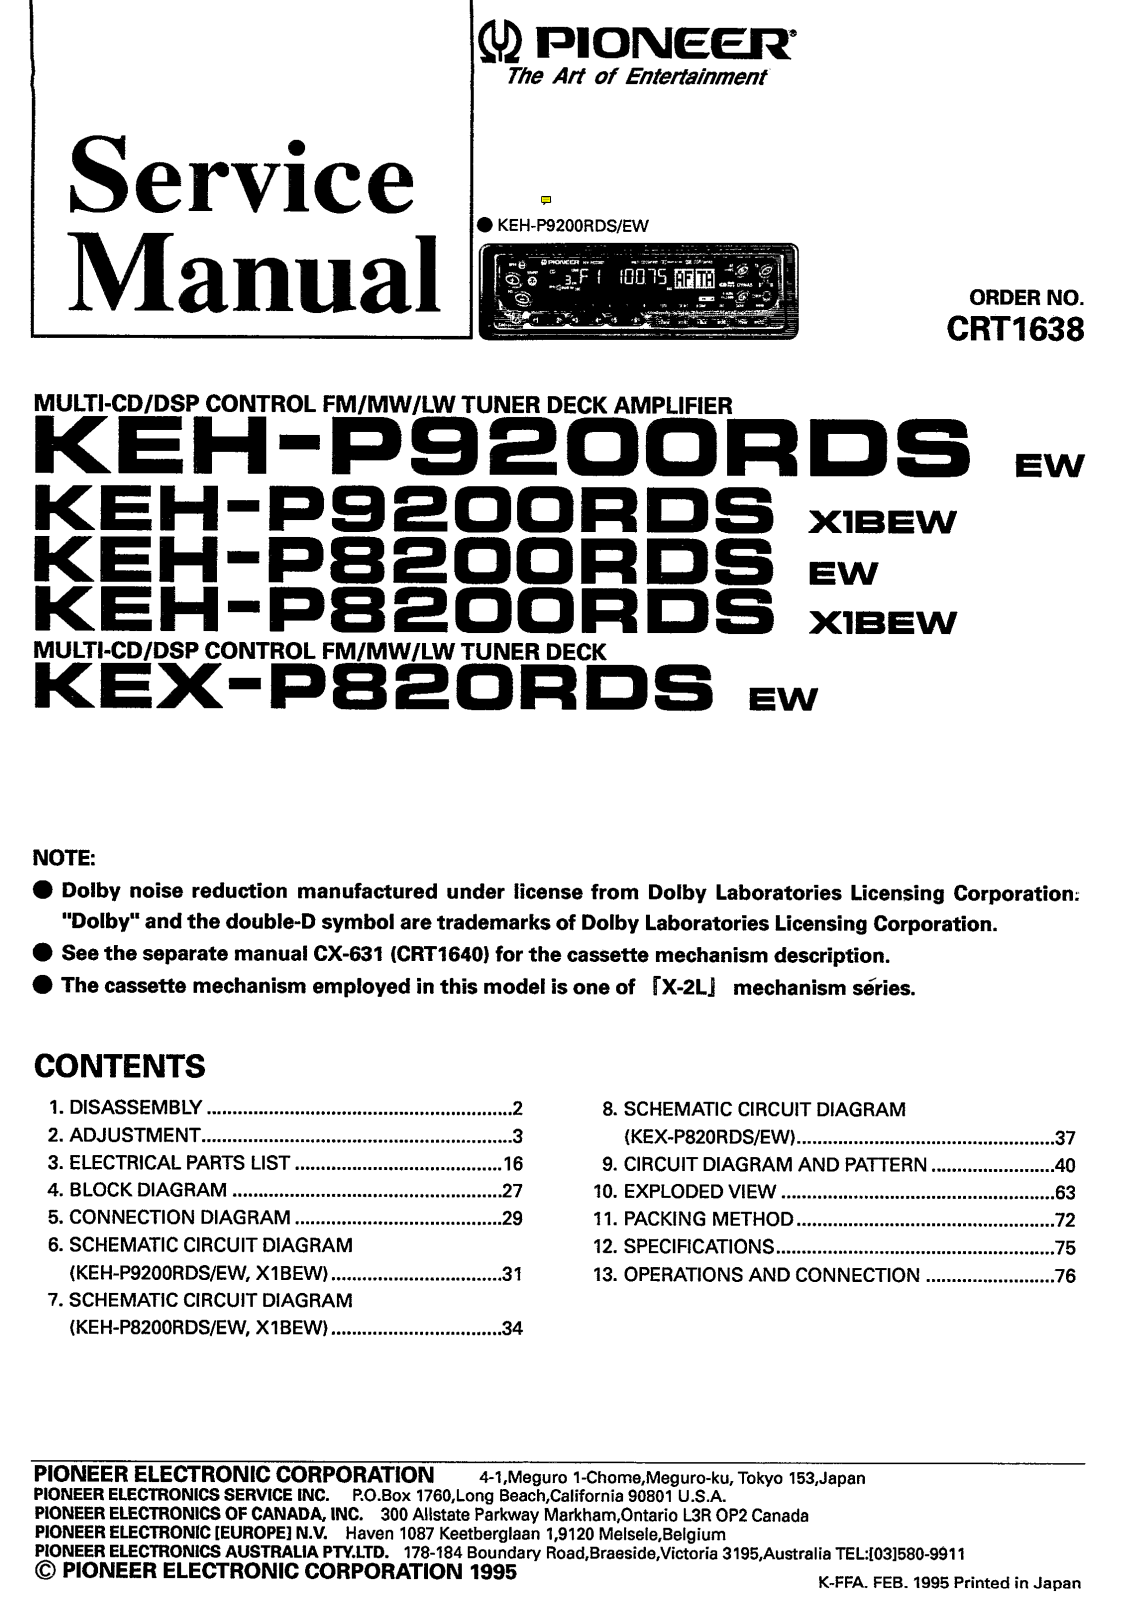 Pioneer KEHP-8200-RDSEW, KEHP-8200-RDSX-1-BEW, KEHP-9200-RDSEW, KEHP-9200-RDSX-1-BEW, KEXP-820-RDSEW Owners manual